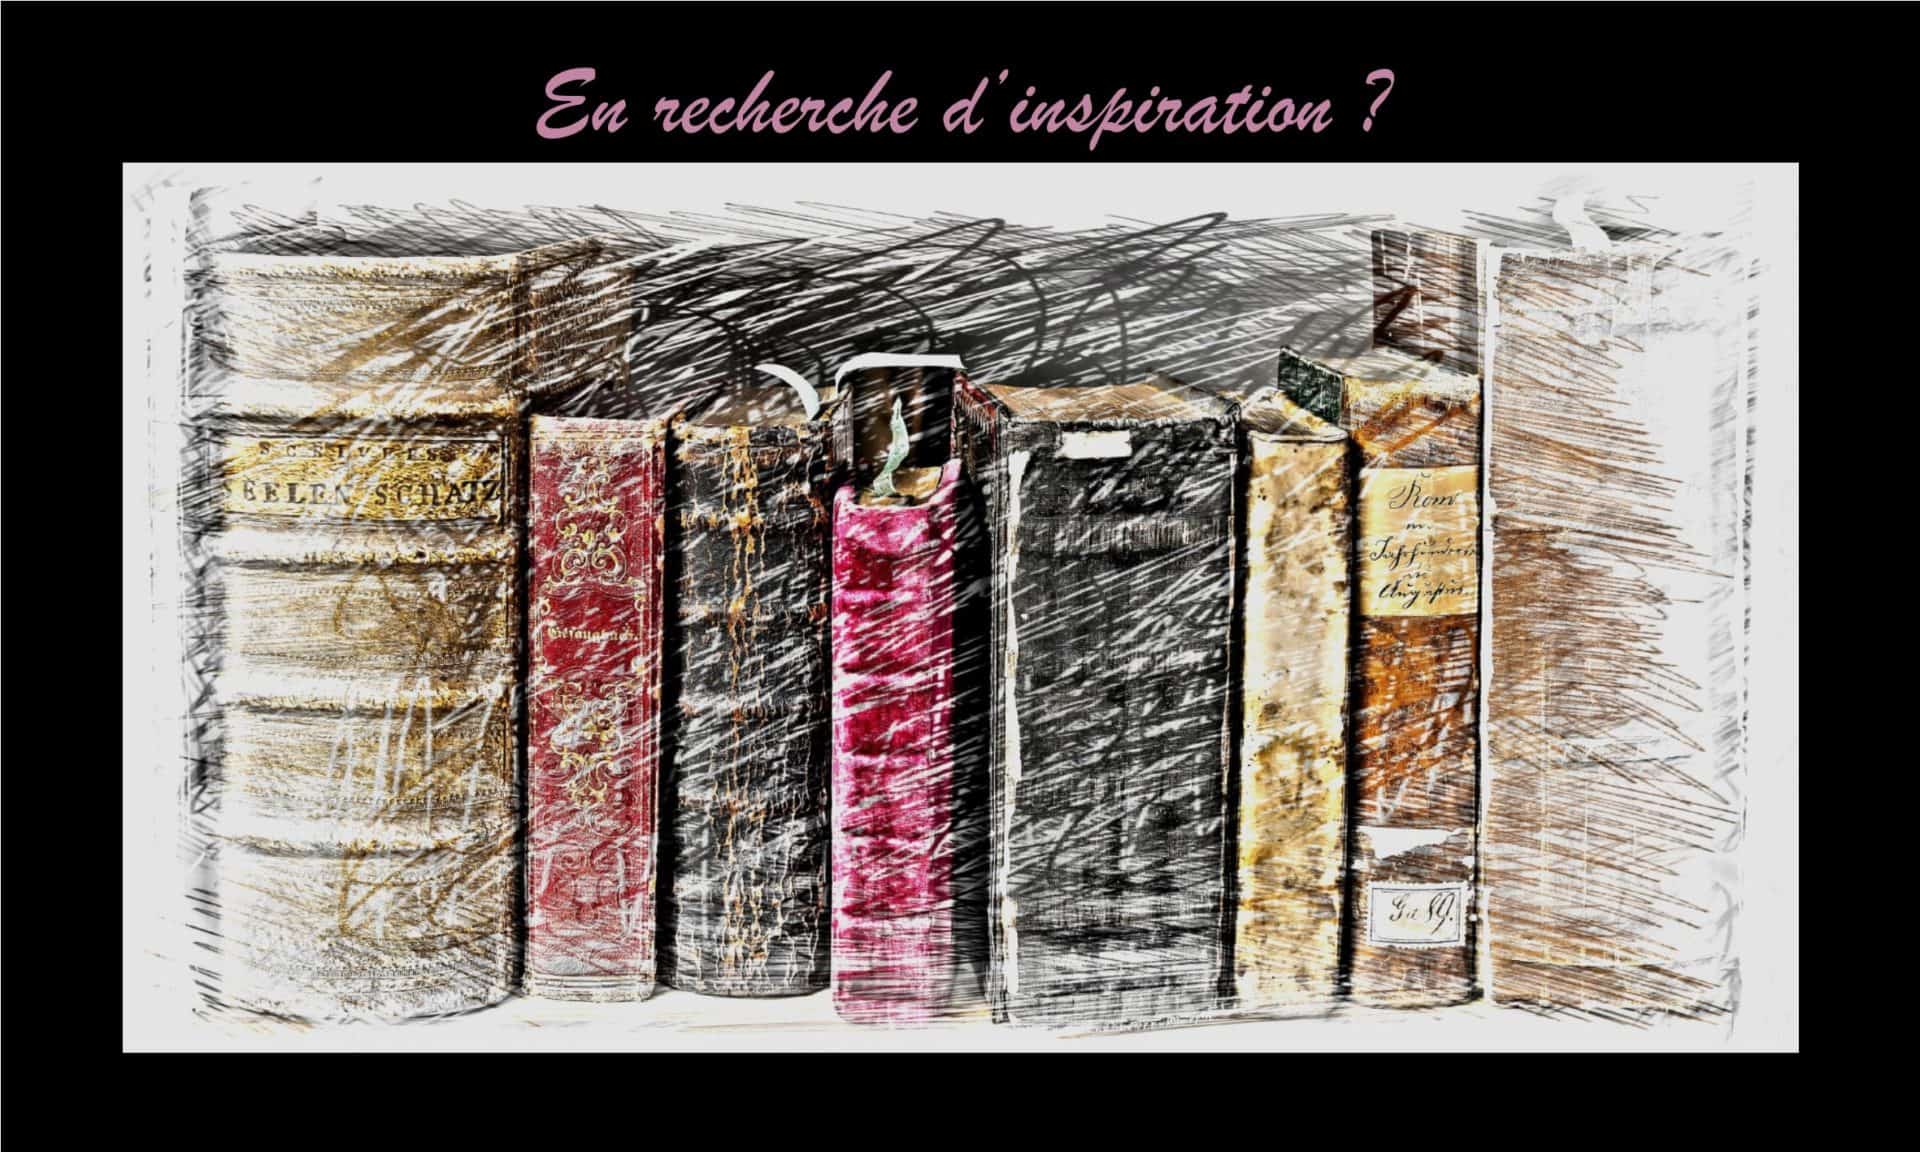 Lectures inspirantes